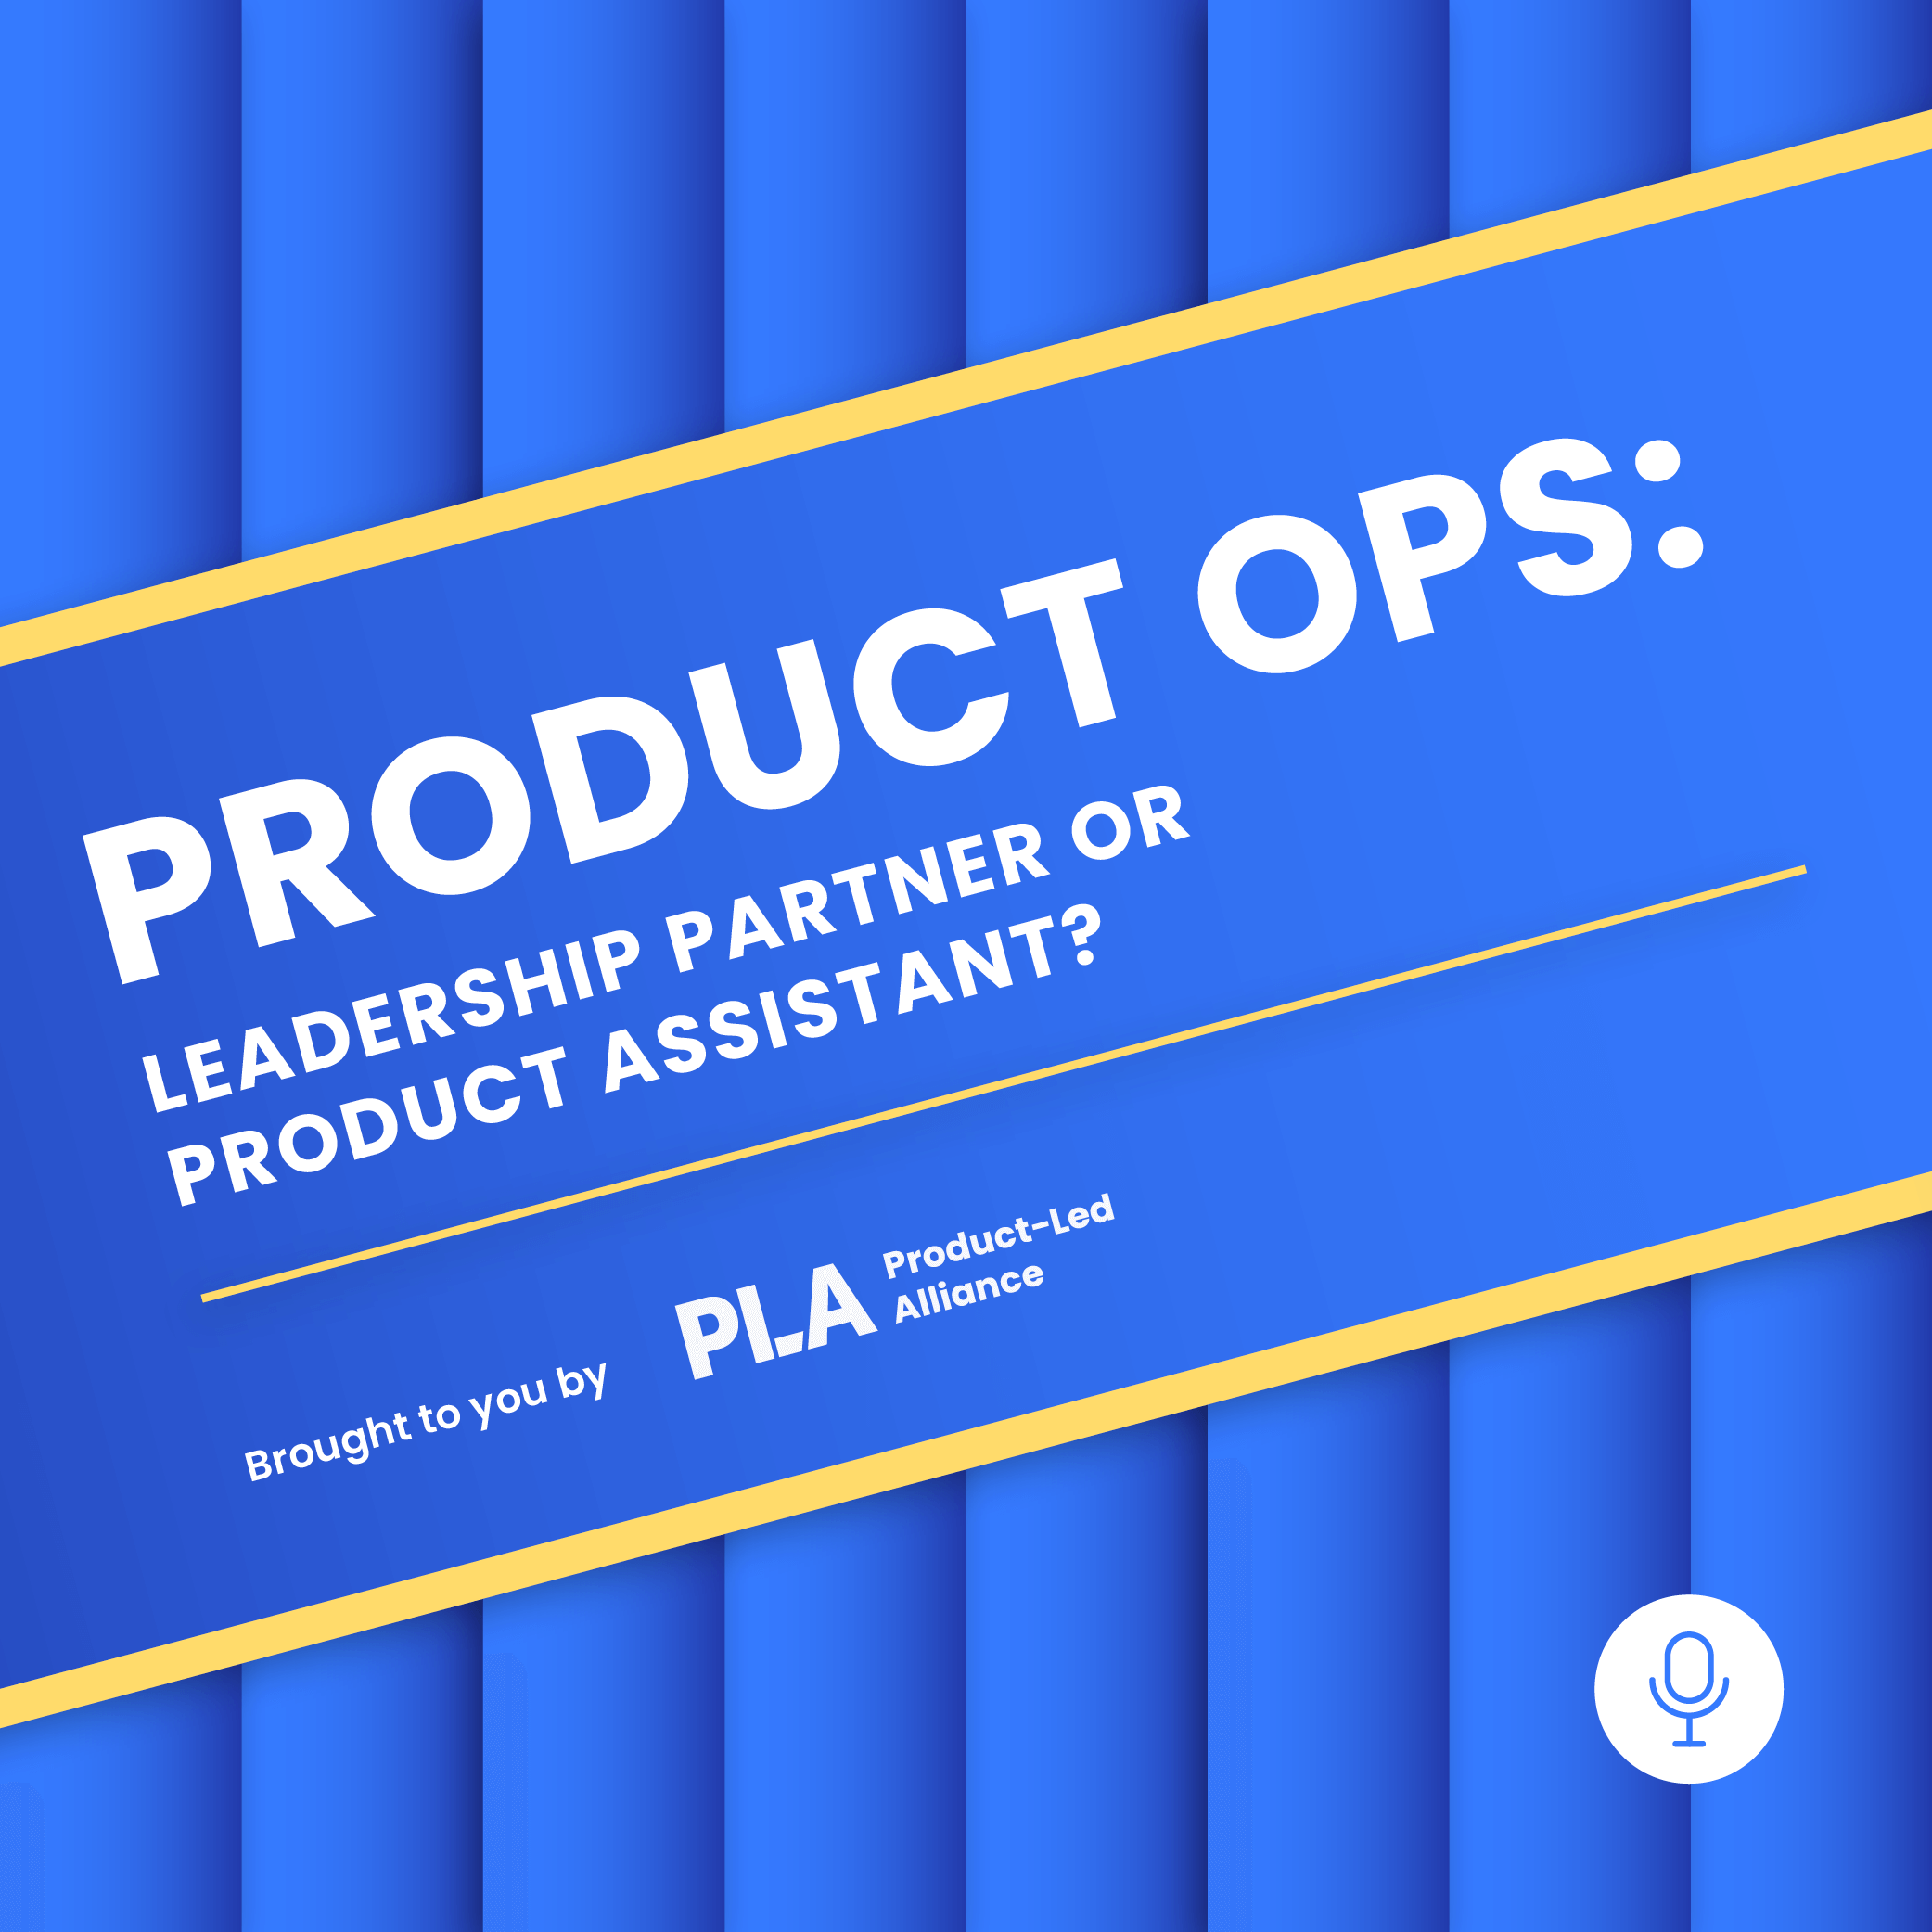 Product ops: Leadership partner or product assistant?